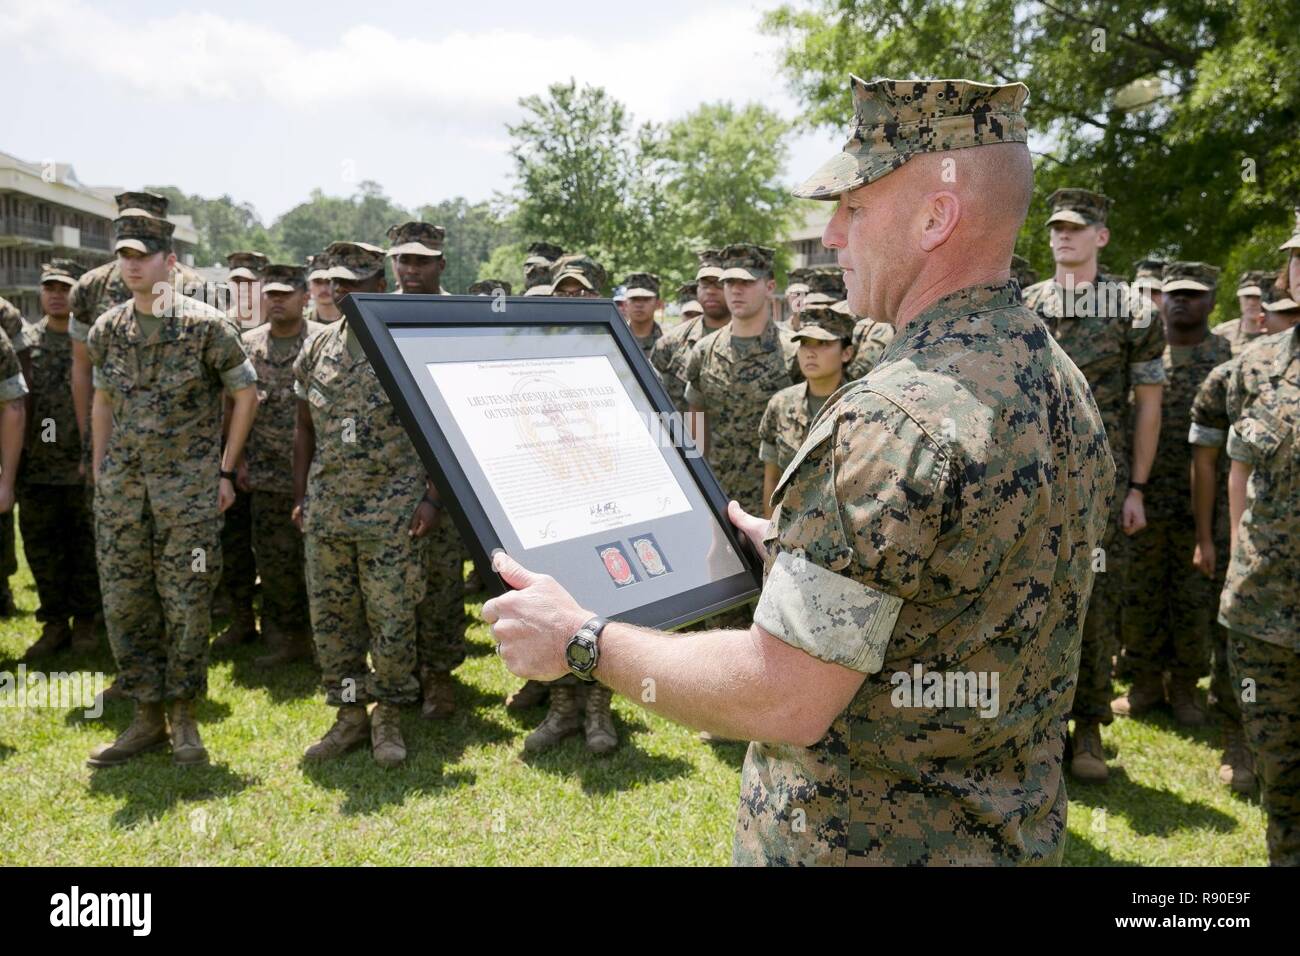 U.S. Marine Corps Sgt. Maj. Richard D. Thresher, sergeant major, II Marine Expeditionary Force (II MEF), reads the citation for the “Lt. Gen. Chesty Puller” Outstanding Leadership Award as it is being presented to the Marines and Sailors of 2nd Medical Battalion, II MEF, Camp Lejeune, N.C., May 10, 2017. The battalion earned this award for exceptional professional ability, superior performance and dedication to supporting the mission of the II MEF. Stock Photo